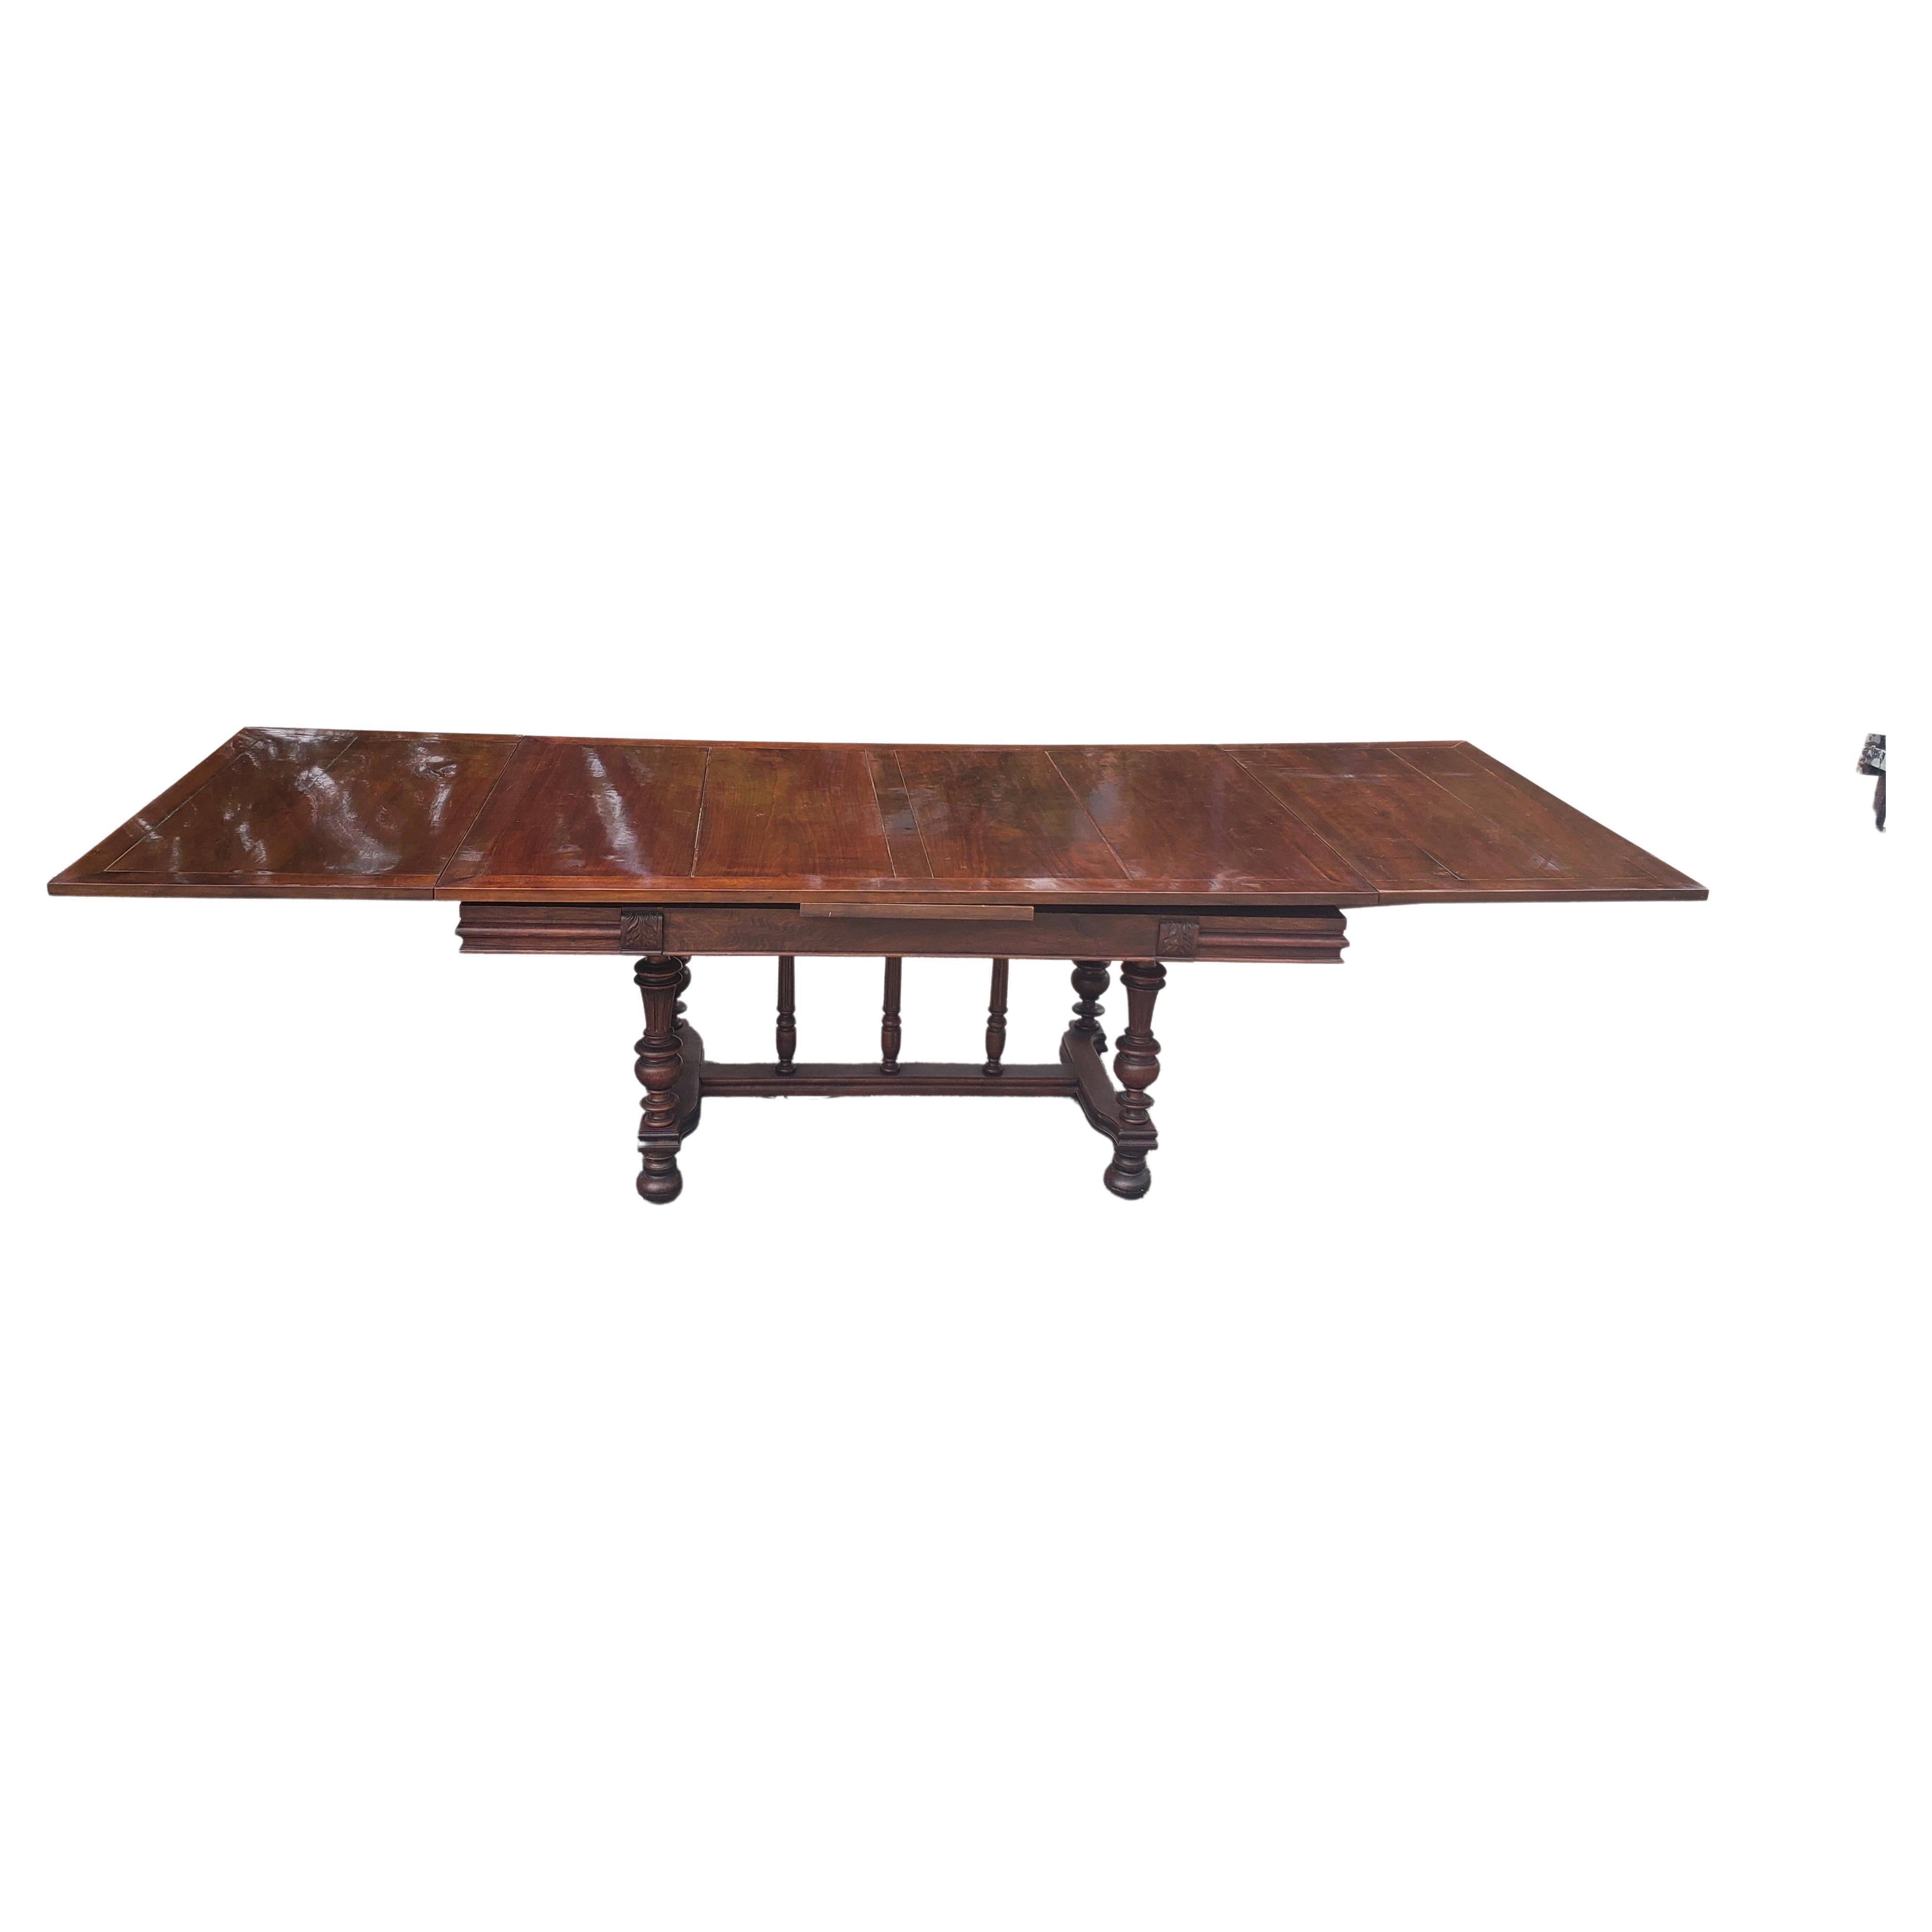 Late Victorian 19th Century Refinished Walnut Stretcher Draw Leaf Dining Table